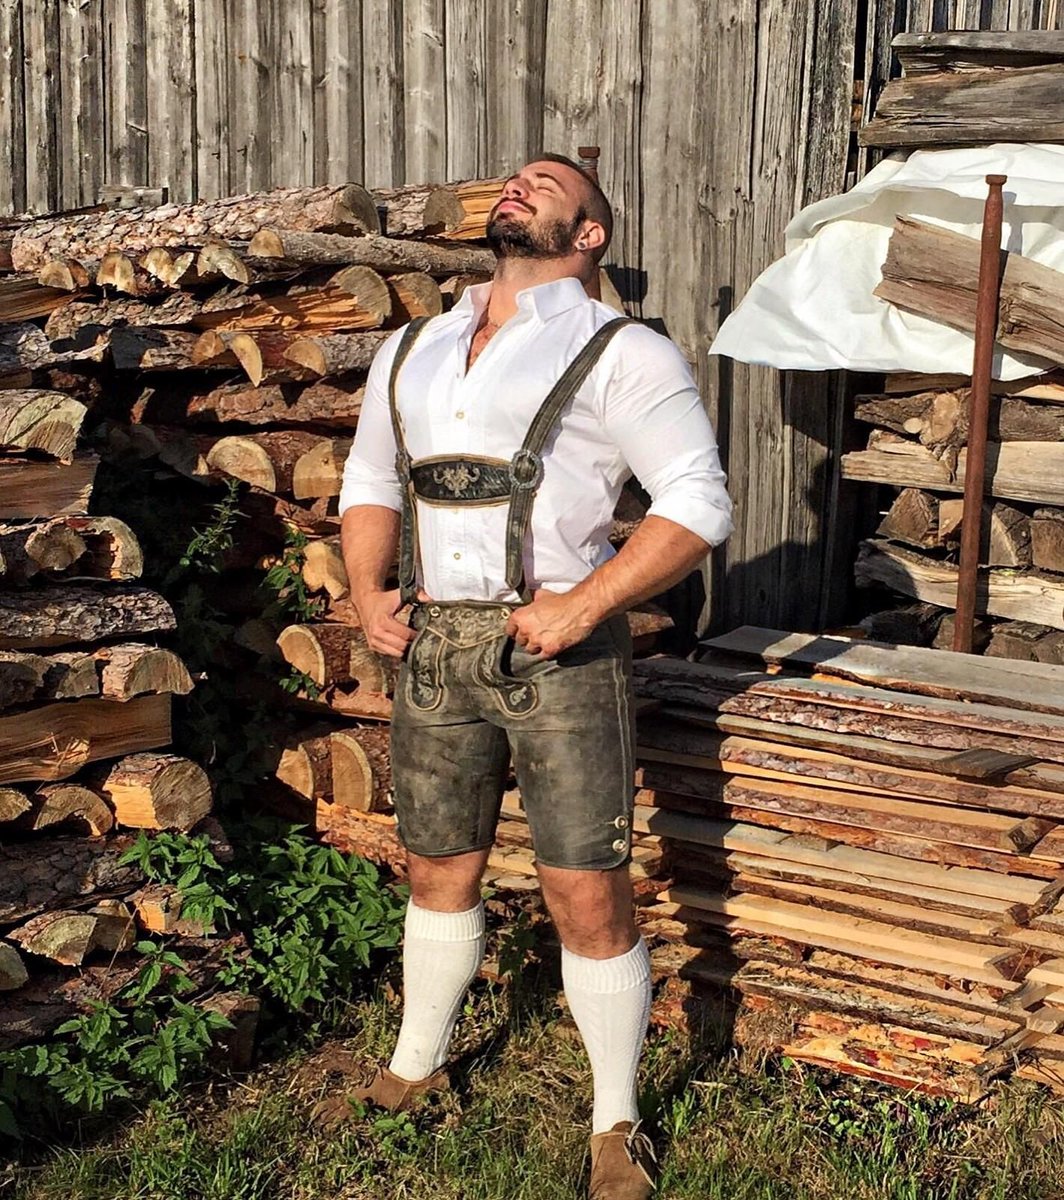 Got a Oktoberfest thing goin on later today &my bud's nervous abou...